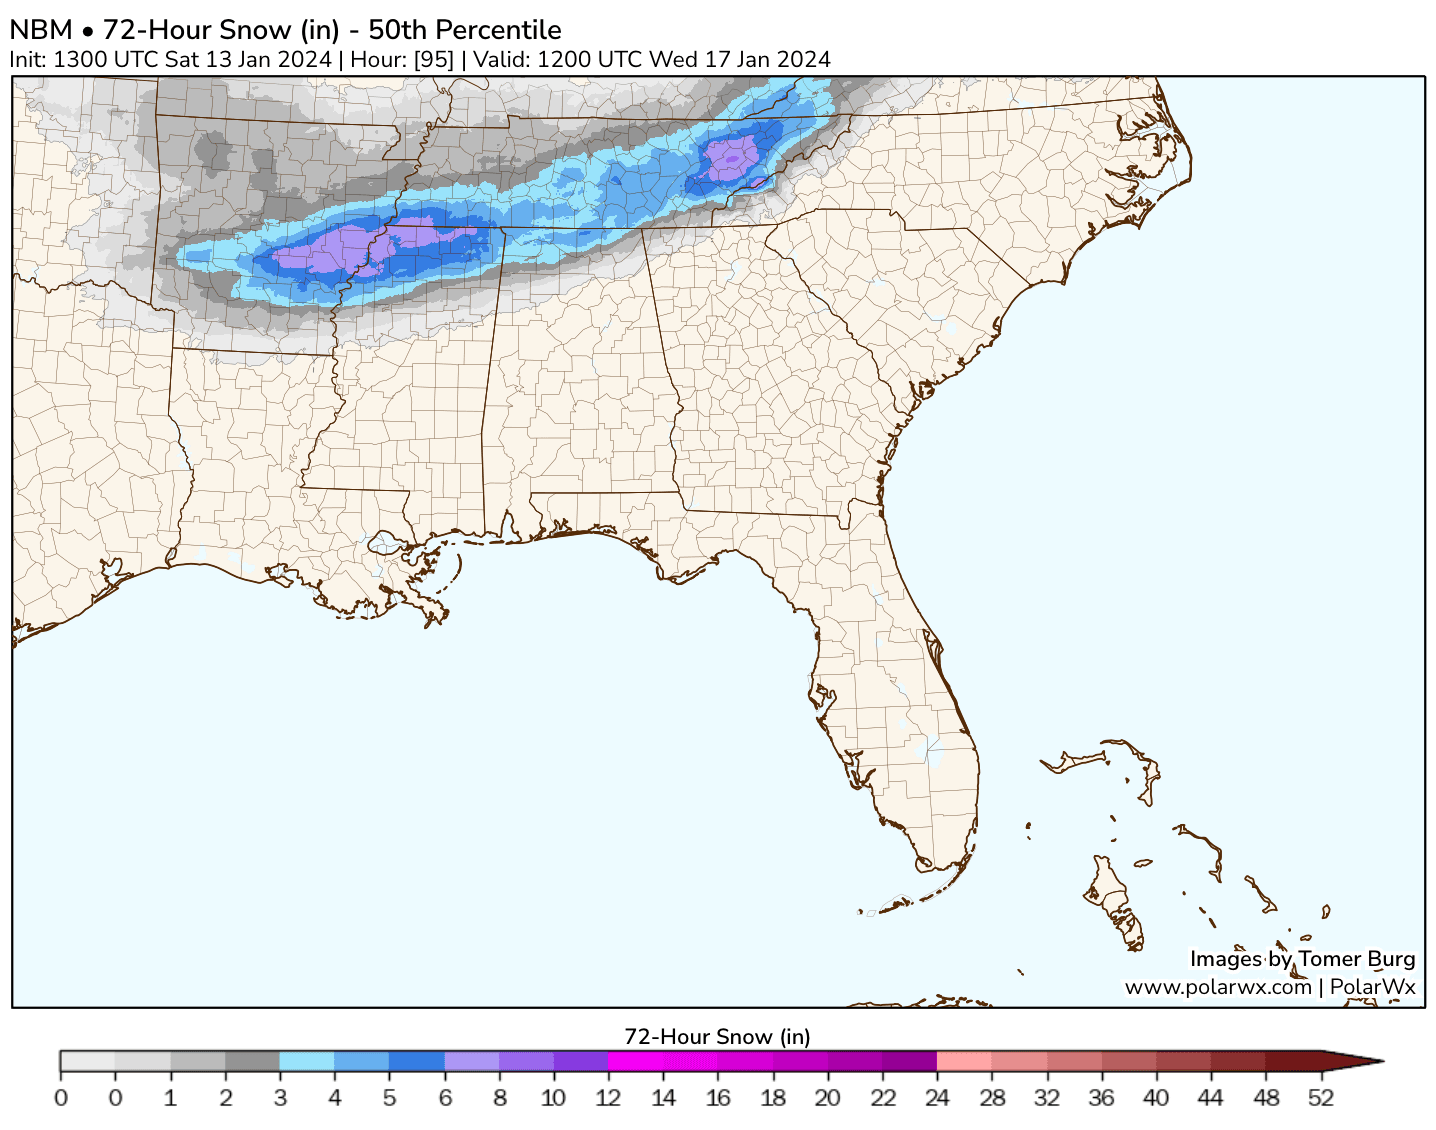 72-Hour Snow Accumulation Forecast (most likely to occur if warm nose is farther north and causes ice mixing issues)